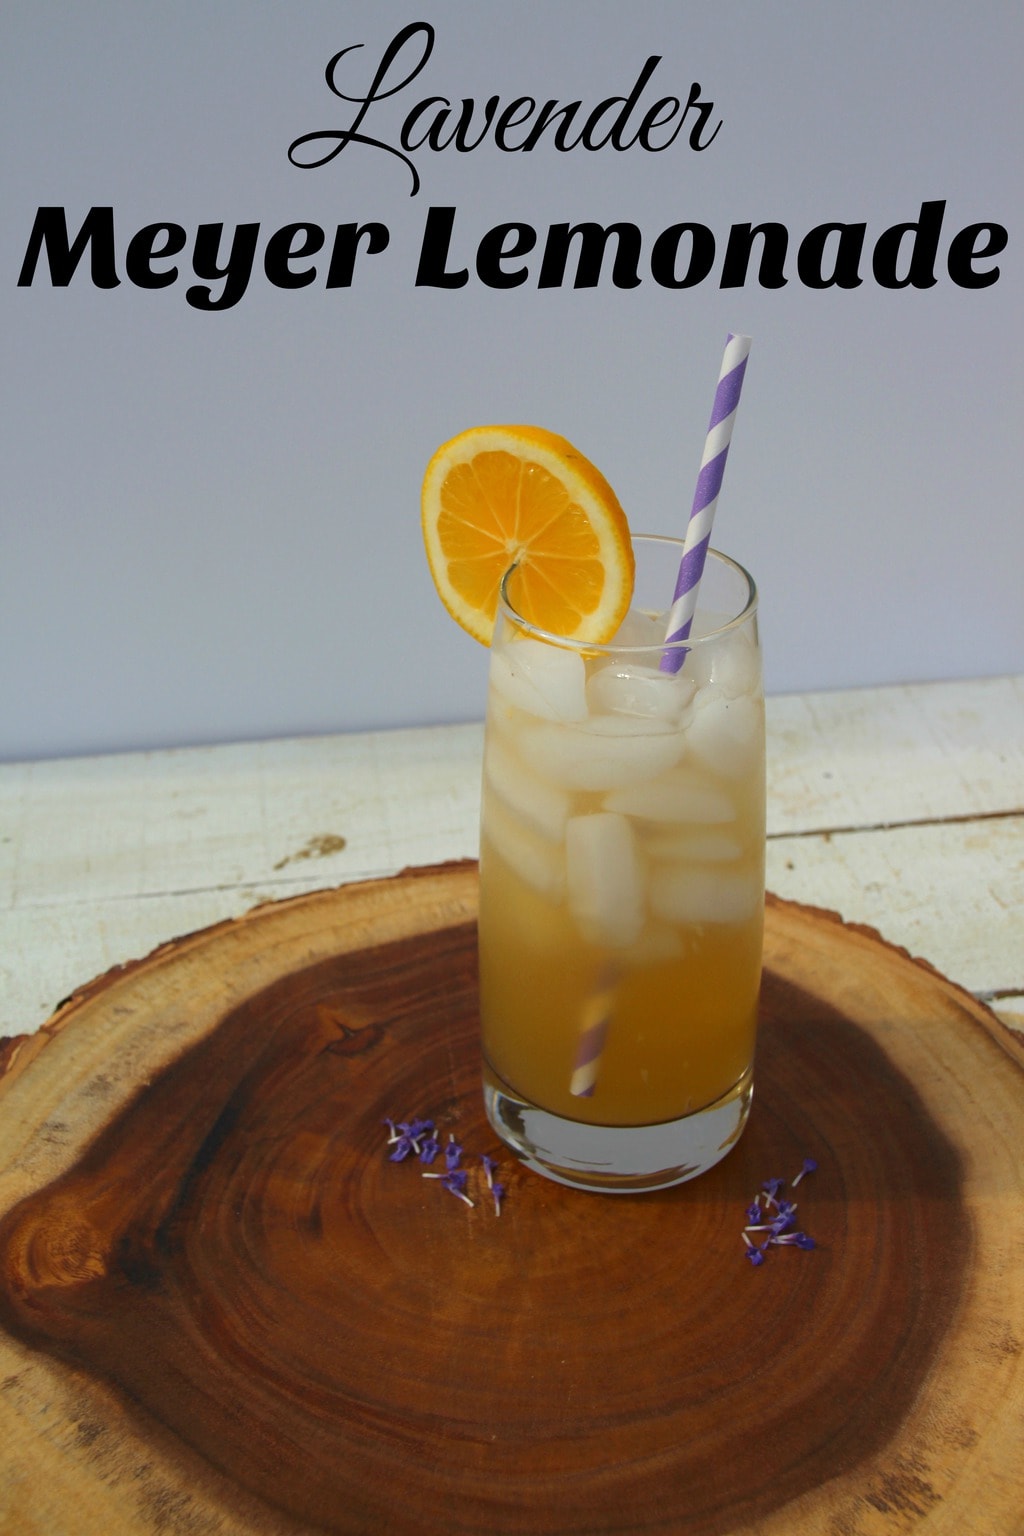 Head to the kitchen and make this DIY recipe for delicious lavender meyer lemonade fresh from your garden